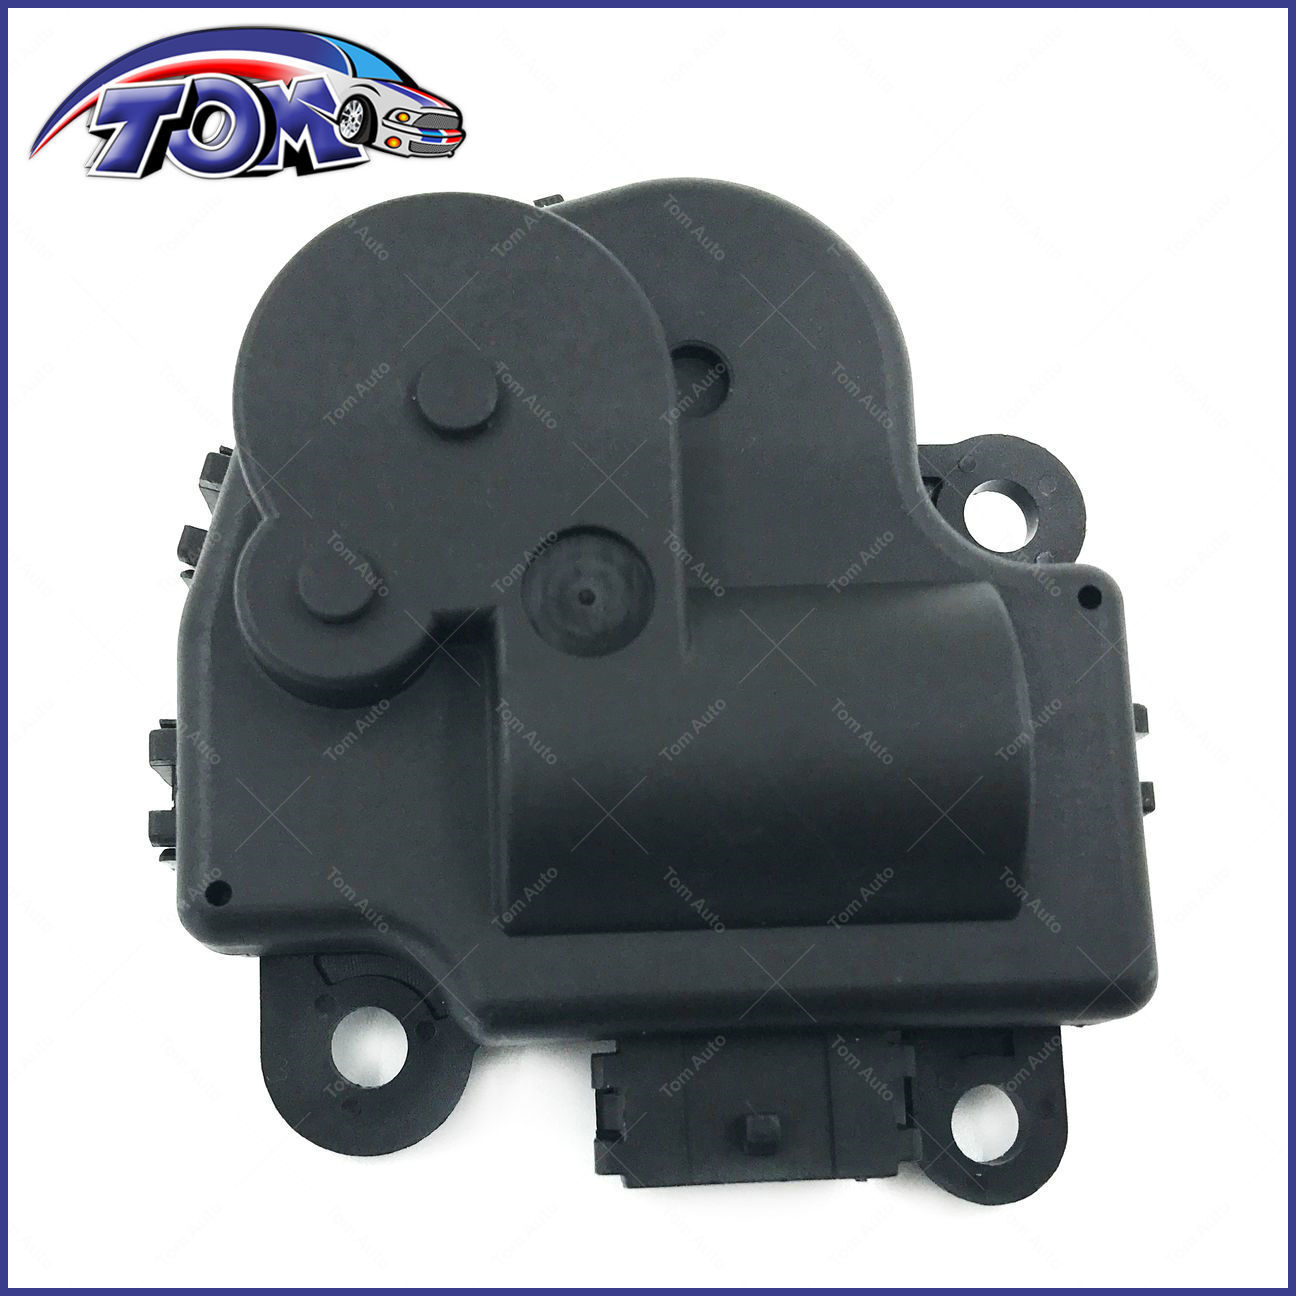 Brand New Heater Blend Door Actuator For 04-10 Chevy Impala 604-108